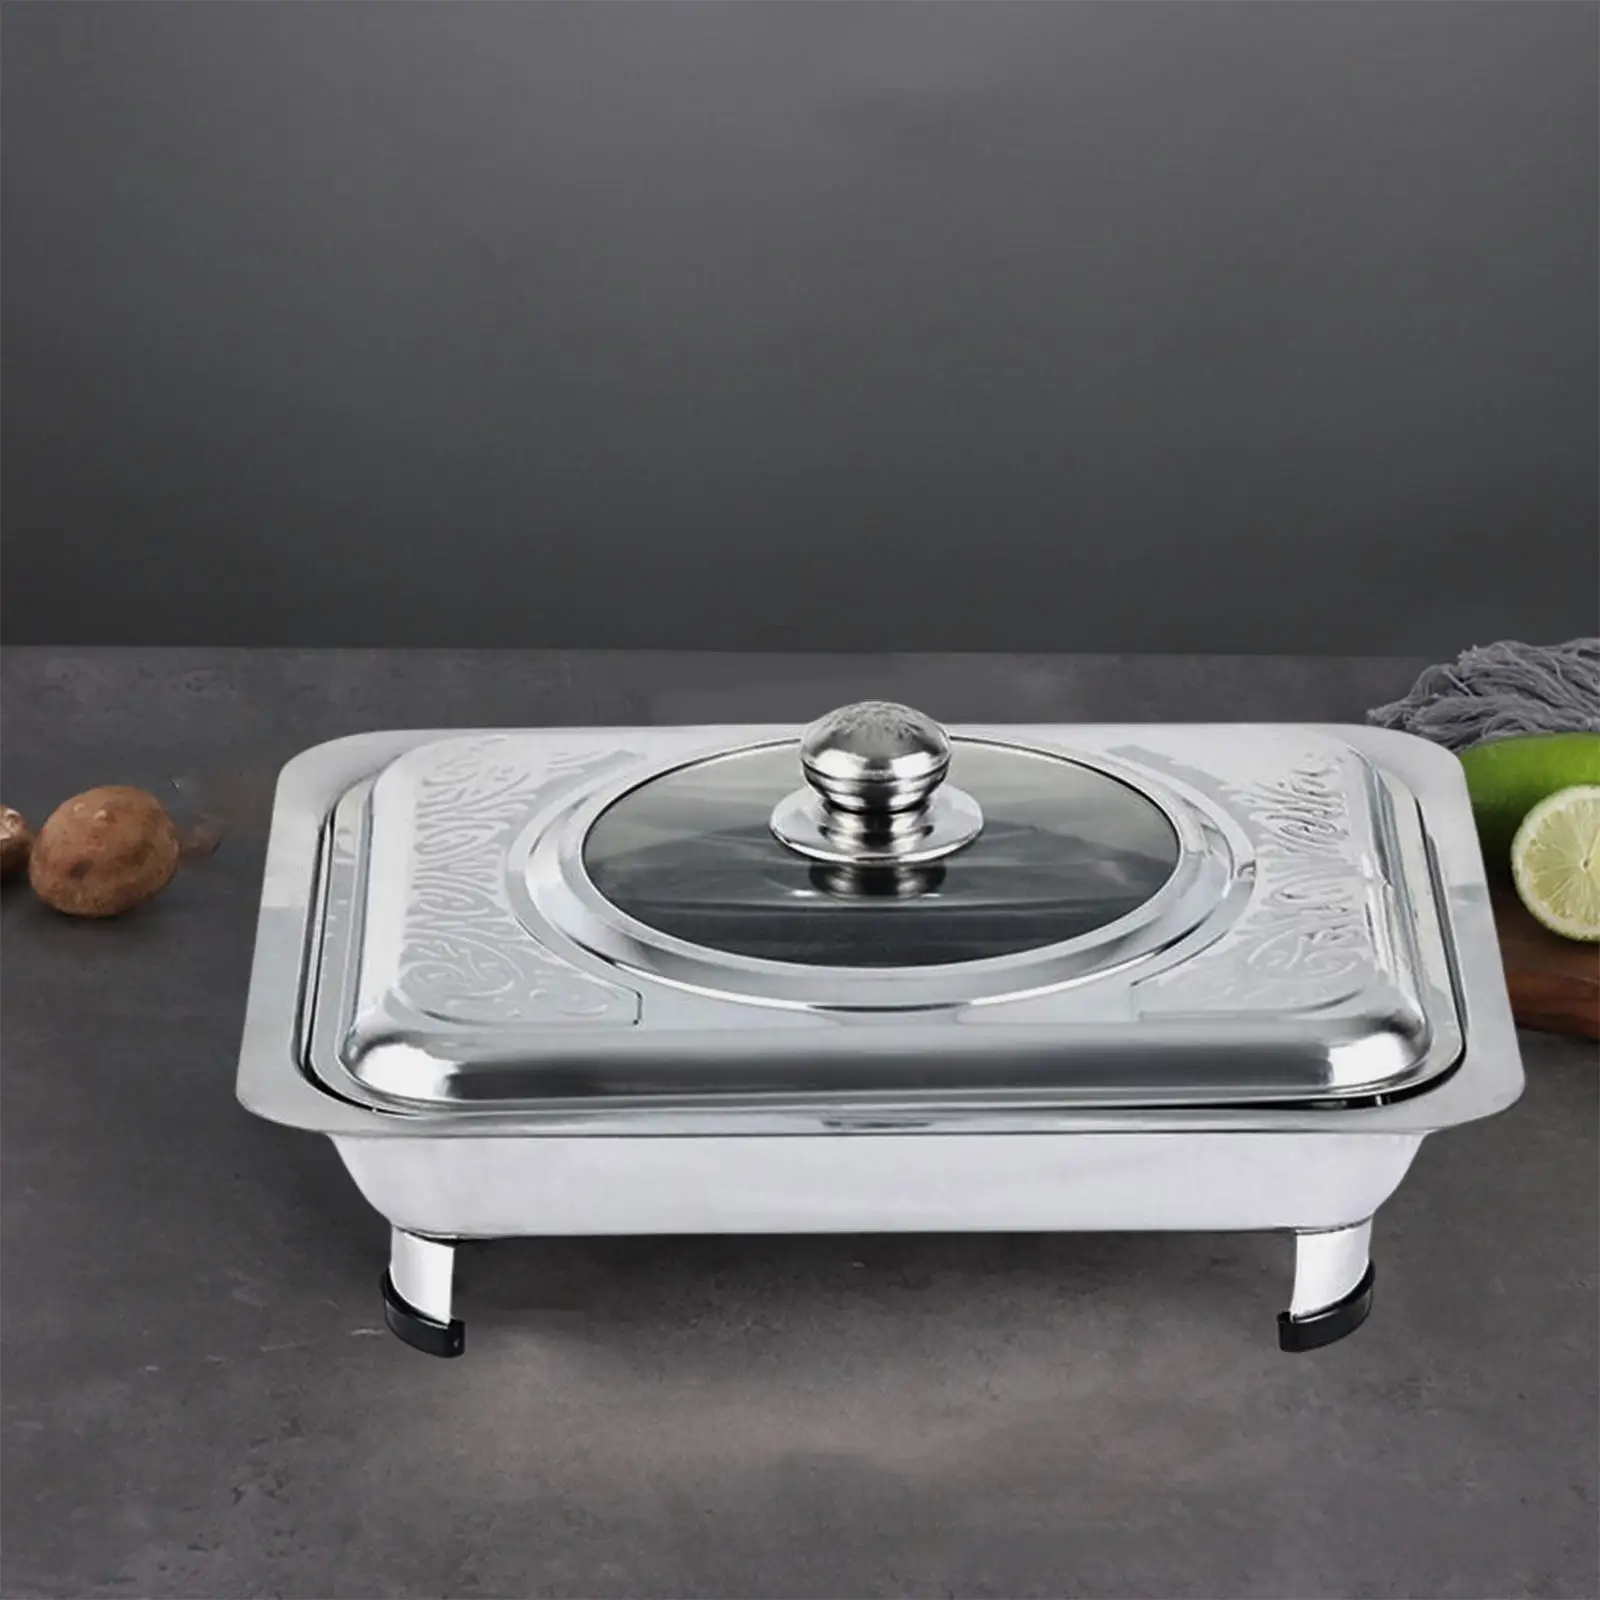 Stainless Steel Rectangular Basin with Lids Silver Plate Warming Tray Chafing Dish for Catering Dinners Parties